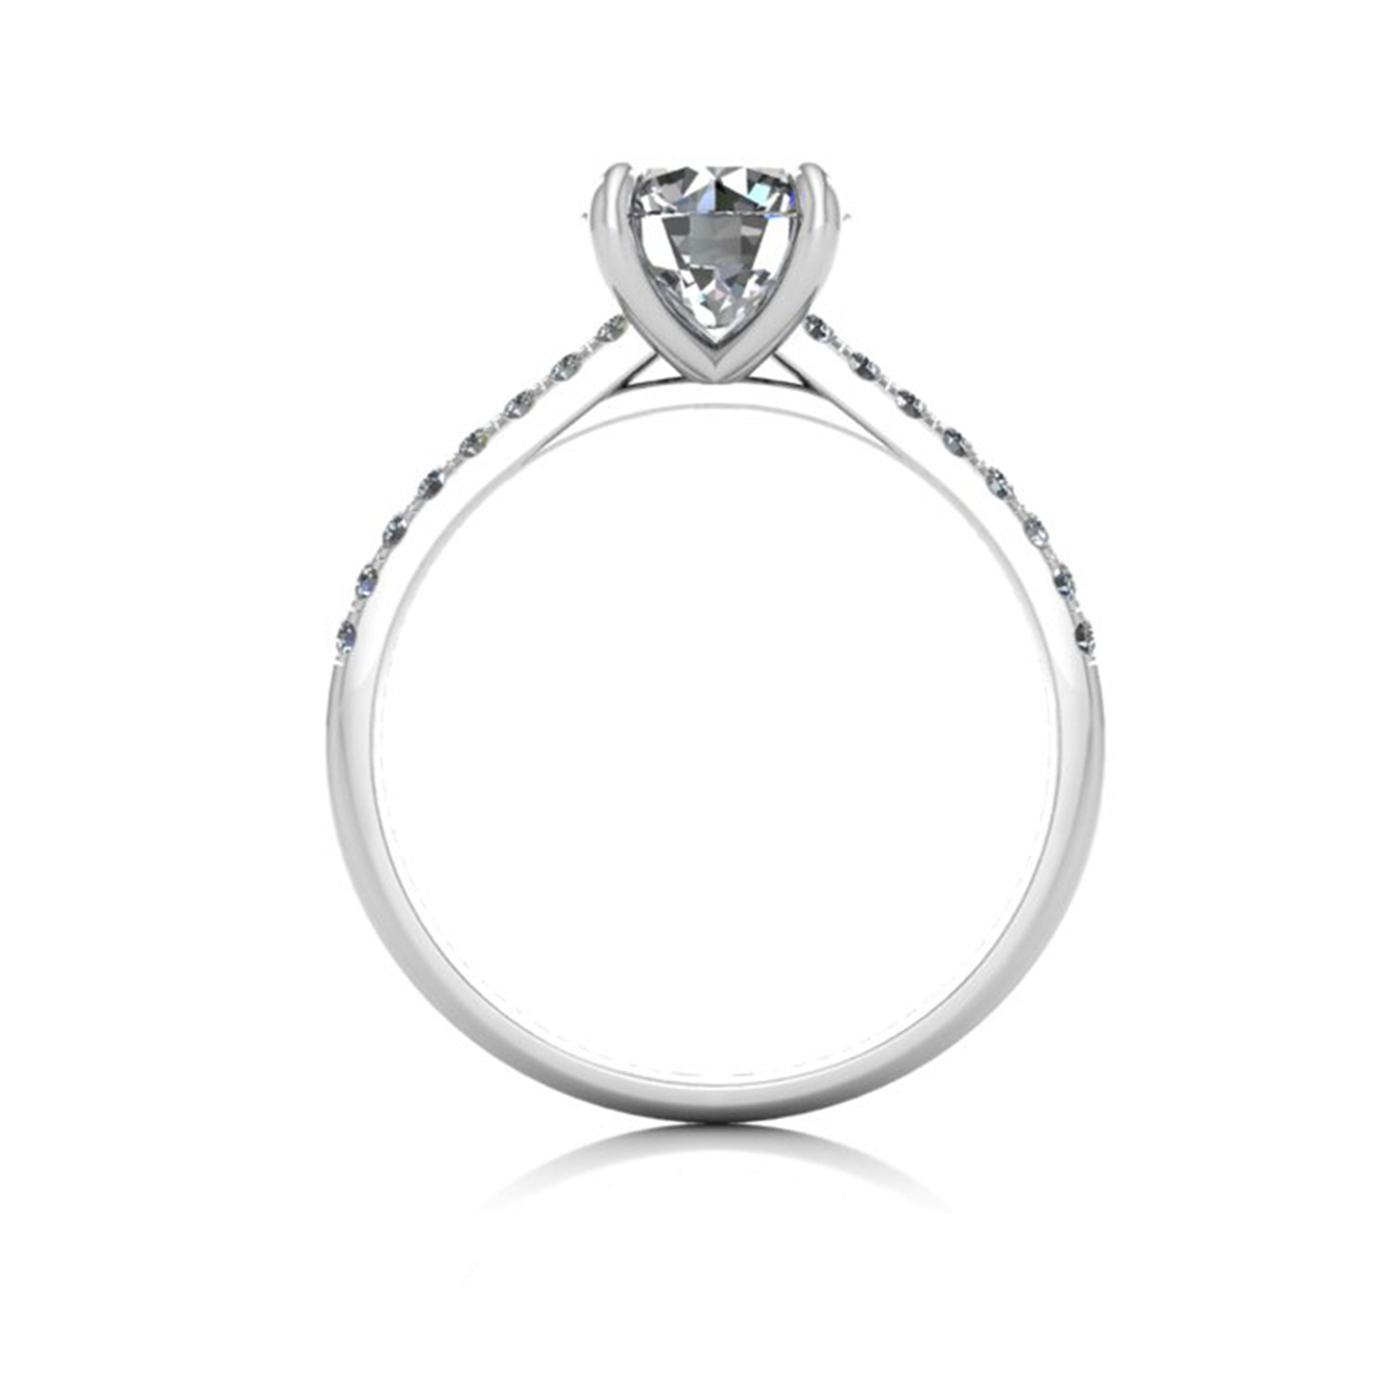 18k white gold 1.2ct 4 prongs round cut diamond engagement ring with whisper thin pavÉ set band